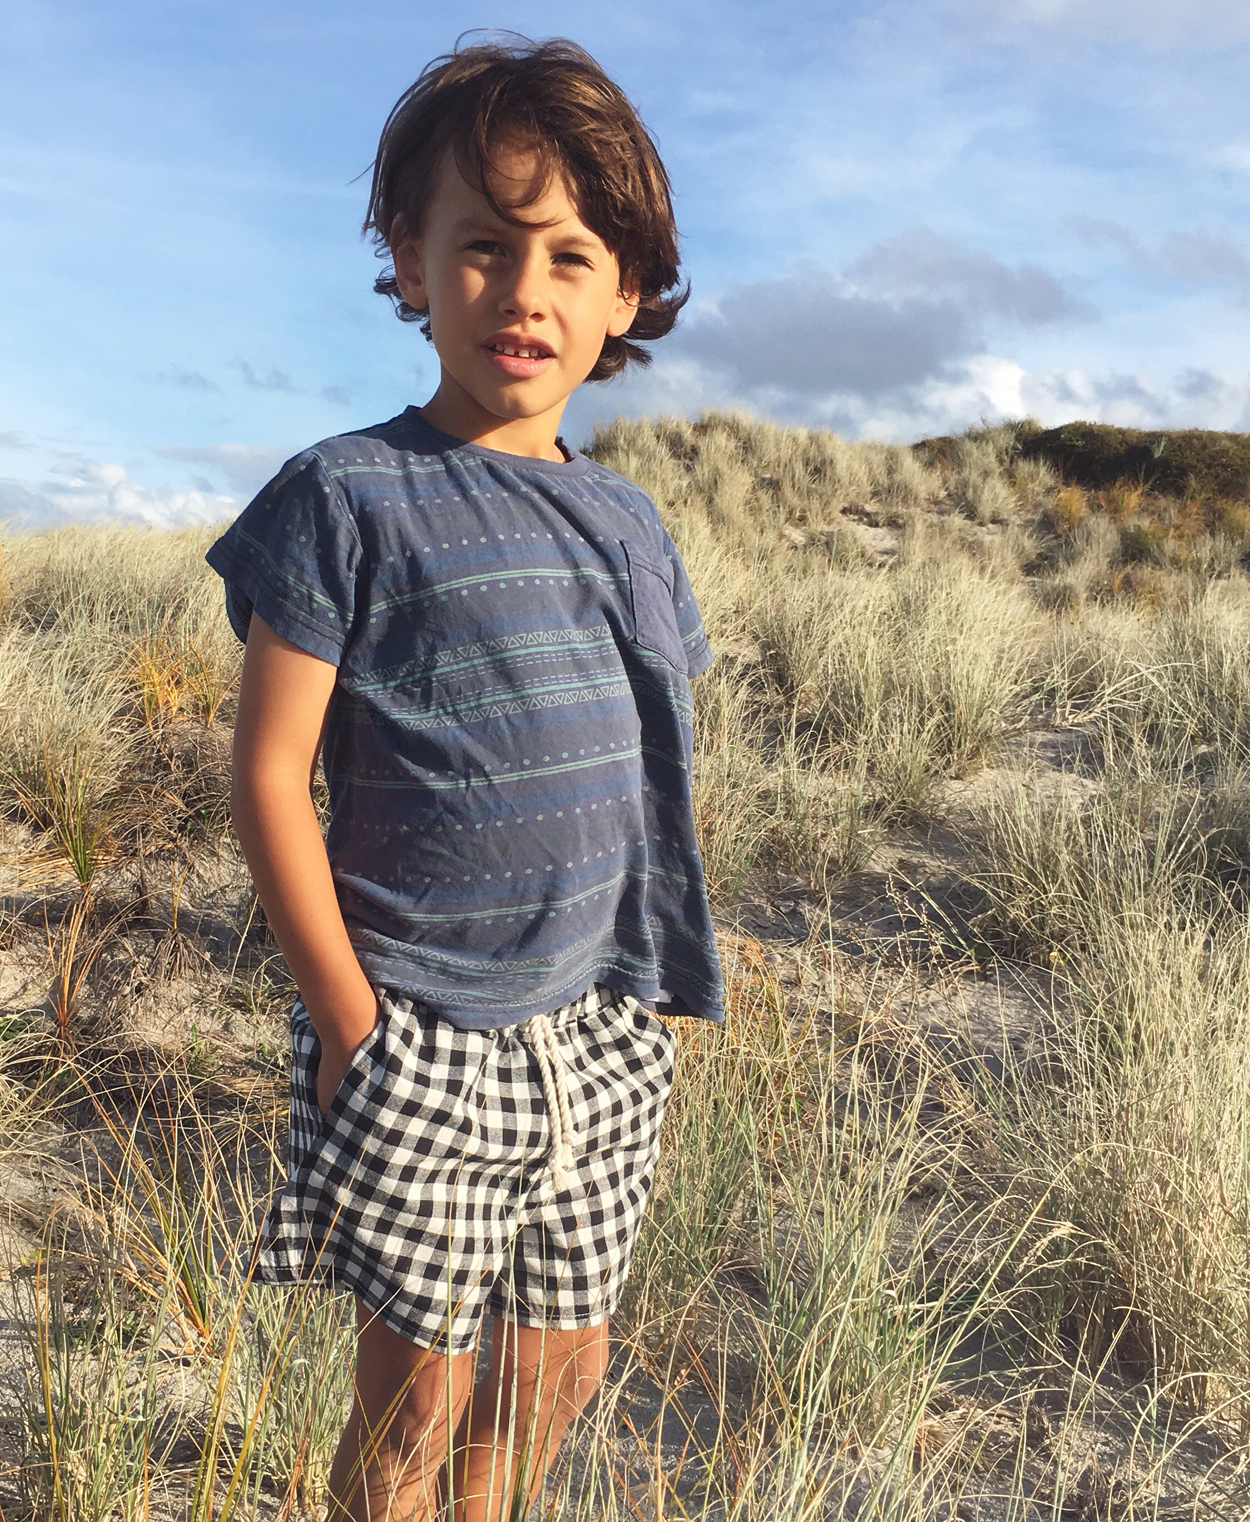 Child wearing the Pai Shorts sewing pattern from Below the Kōwhai on The Fold Line. A shorts pattern made in cotton, poly cotton, linen or chambray fabrics featuring a relaxed fit, above knee length, enclosed elastic waistband, drawstring and in-seam pockets.